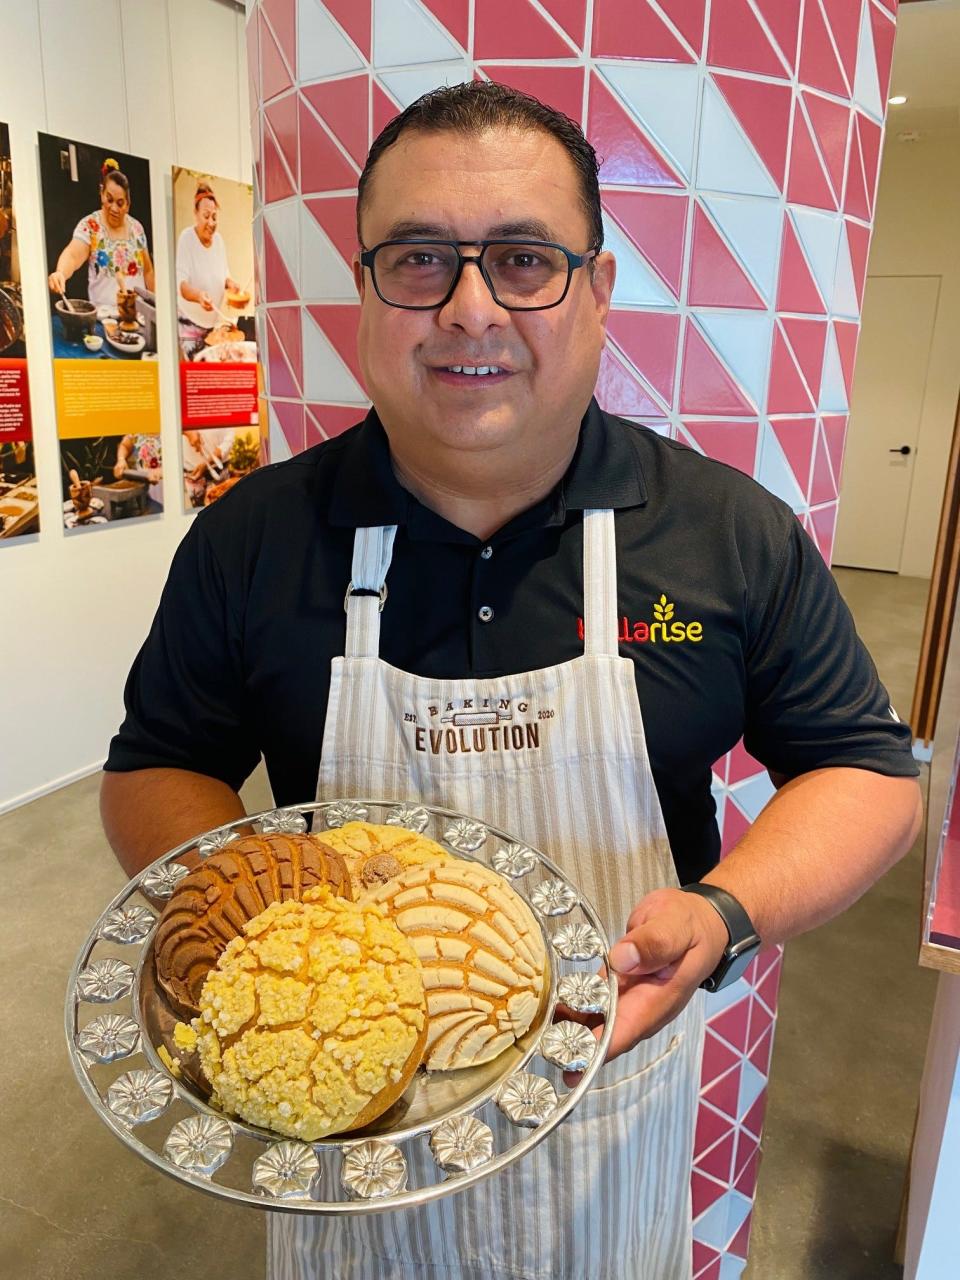 Alex Peña, a California master baker, bread scientist and self-proclaimed bread nerd, will teach four master classes in late February at the Florida Academy of Baking in Satellite Beach.